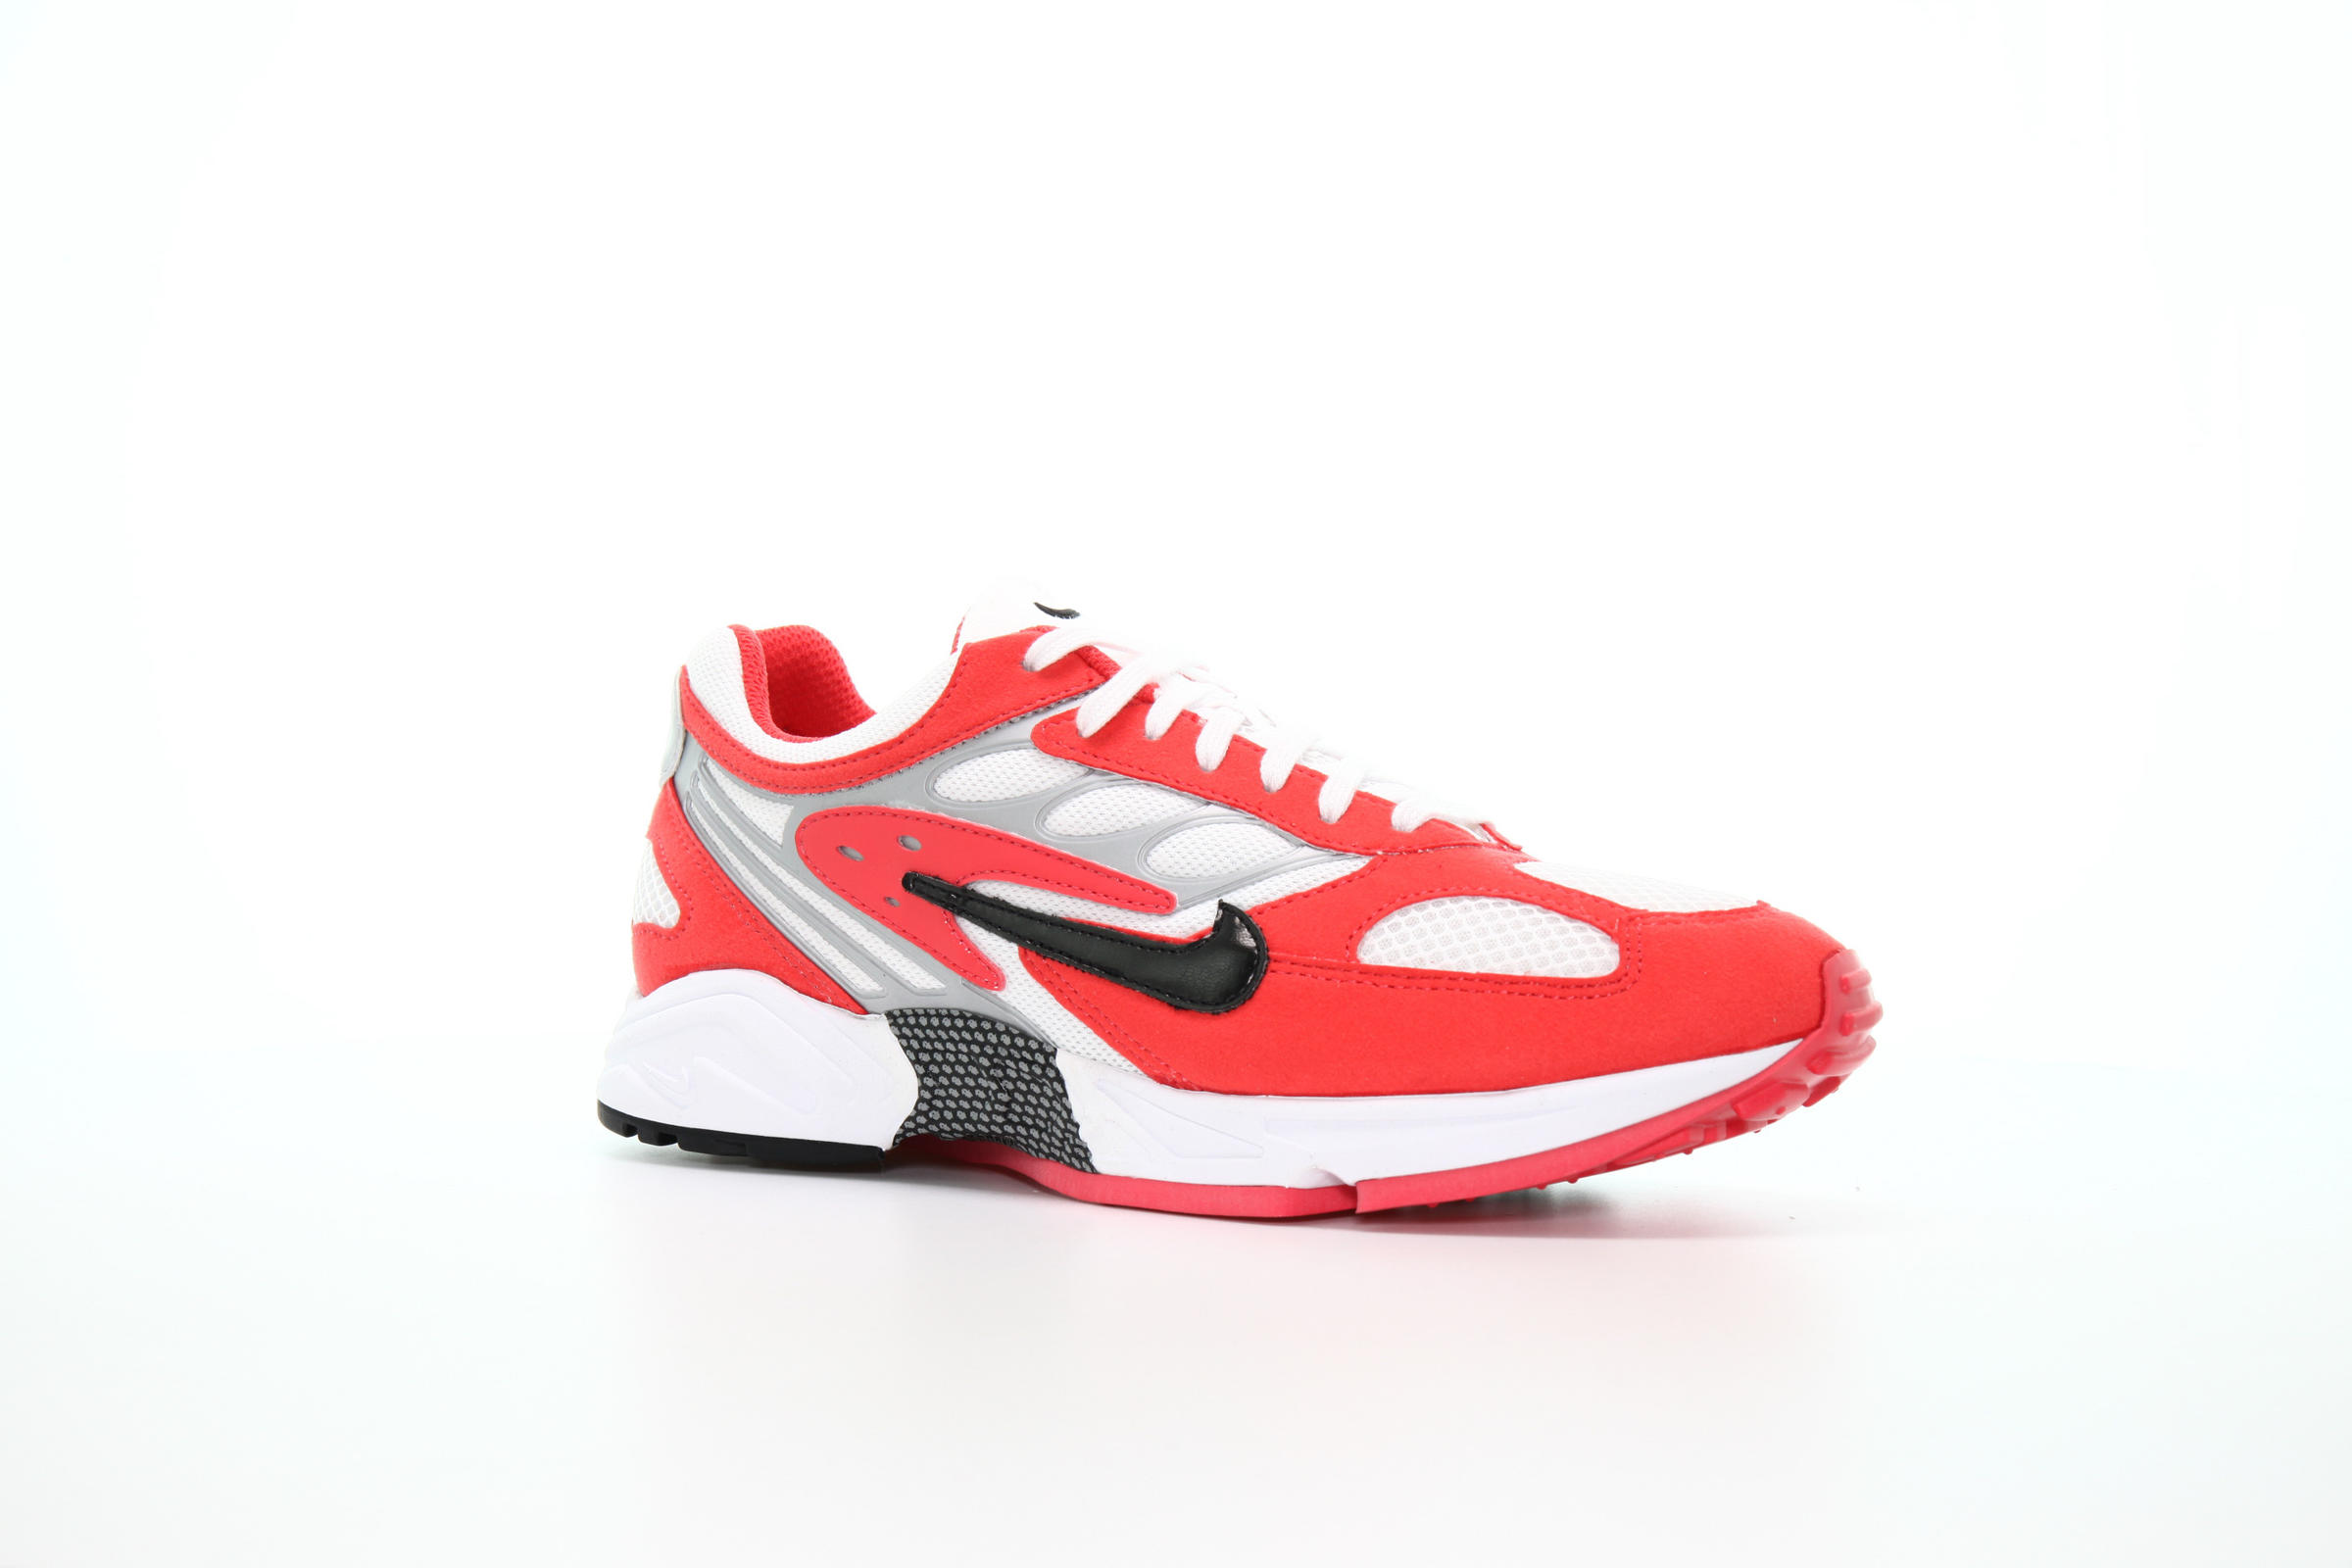 Nike AIR GHOST RACER "TRACK RED"